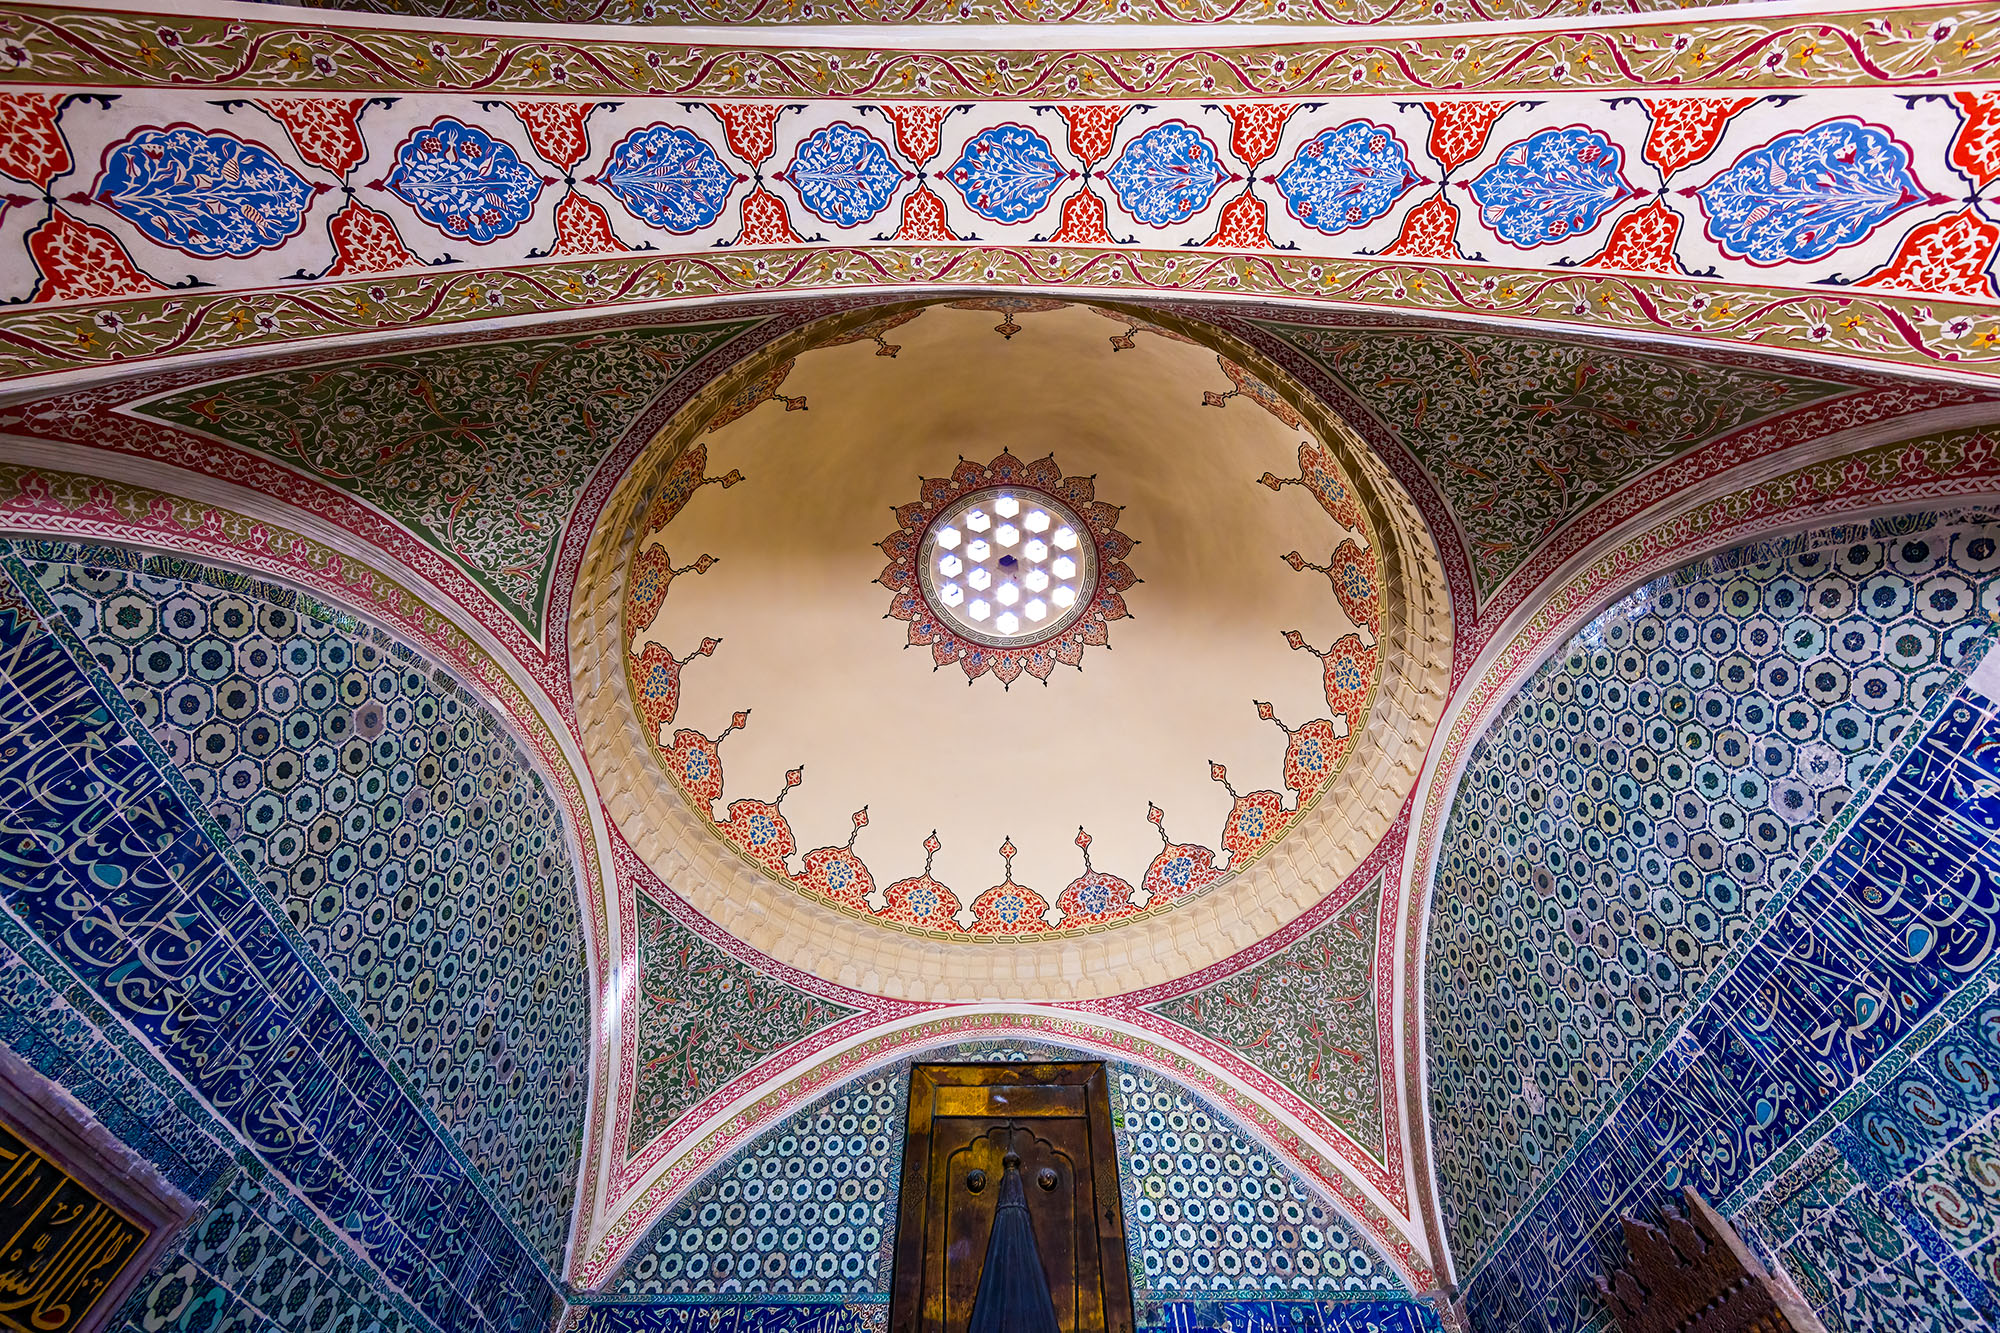 Within the Imperial Harem of Istanbul's Topkapi Palace, I marveled at the resplendent ceiling mosaic. Its intricate design, a...